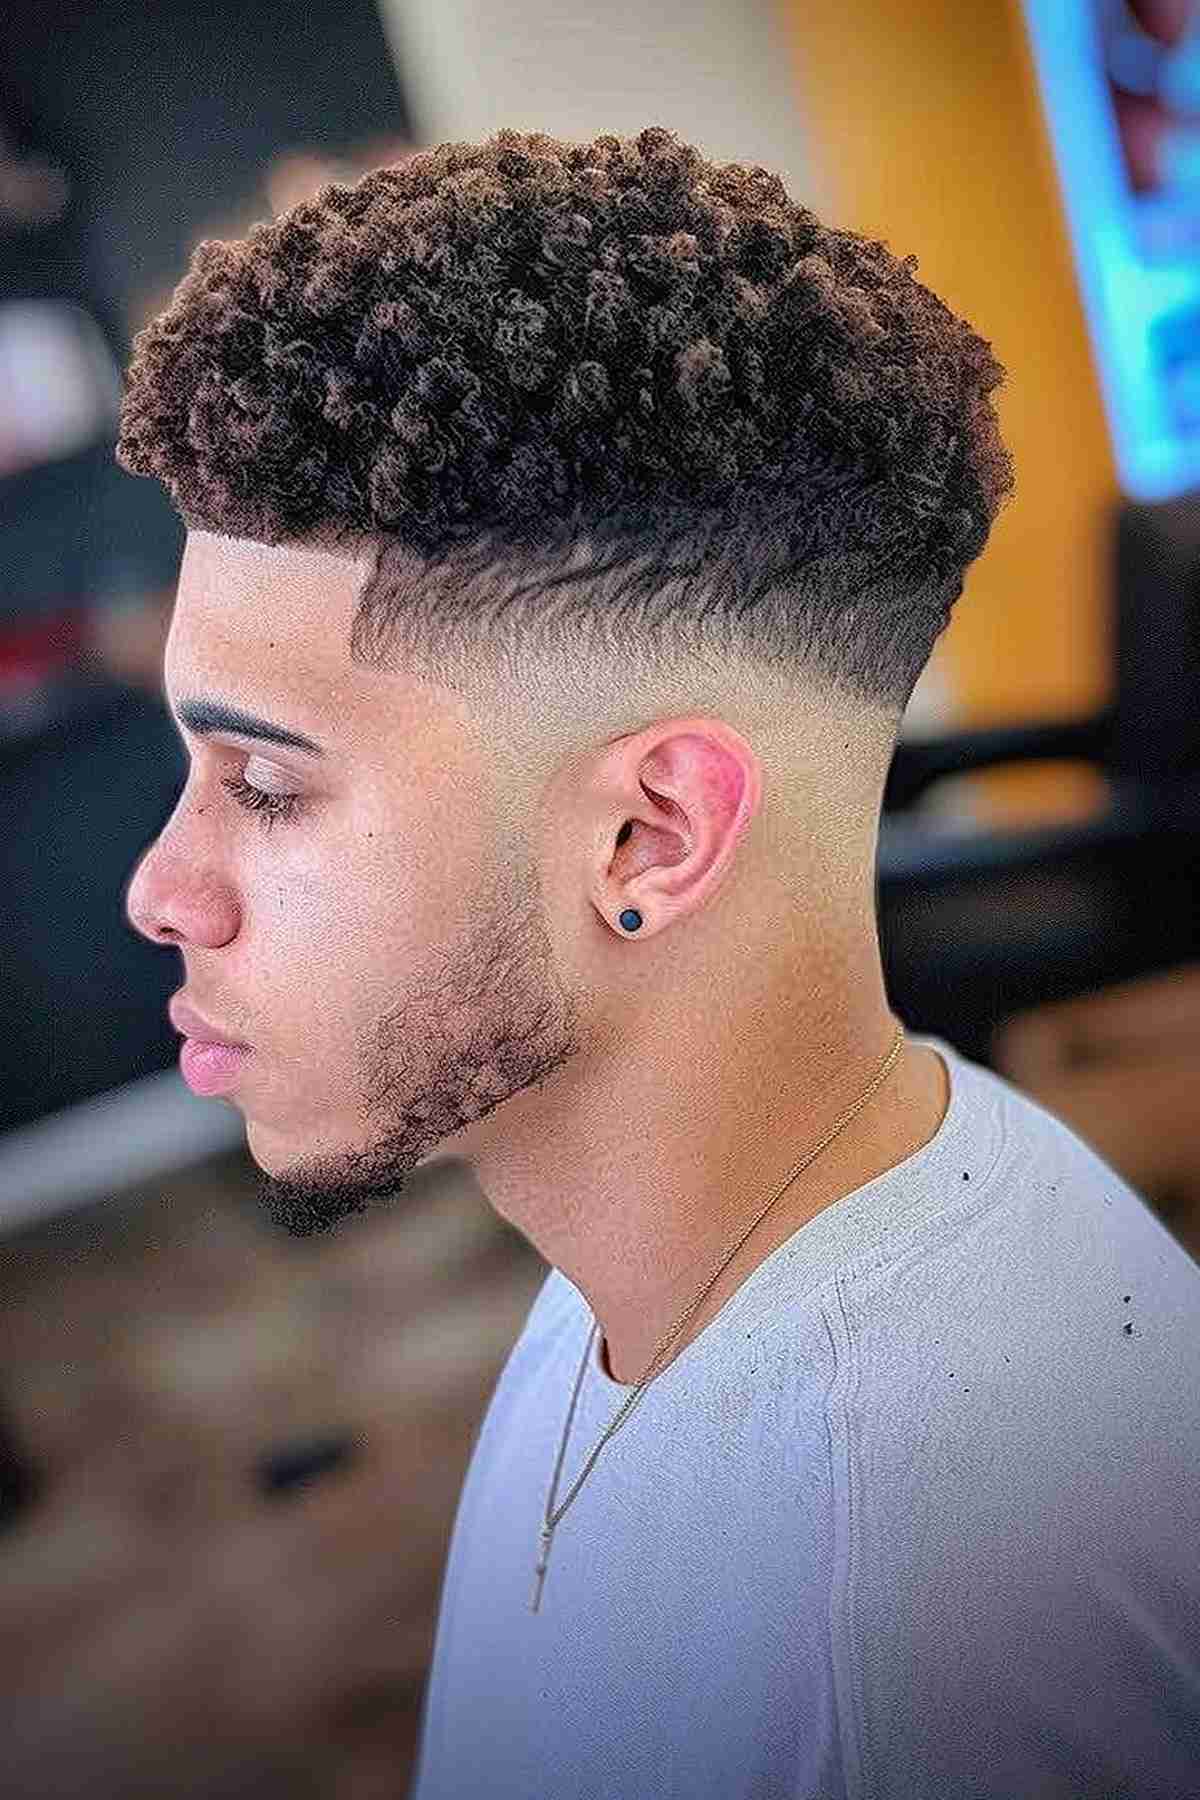 Low bald fade with natural curly hair on top, showcasing sharp, clean lines around the ears and temple.